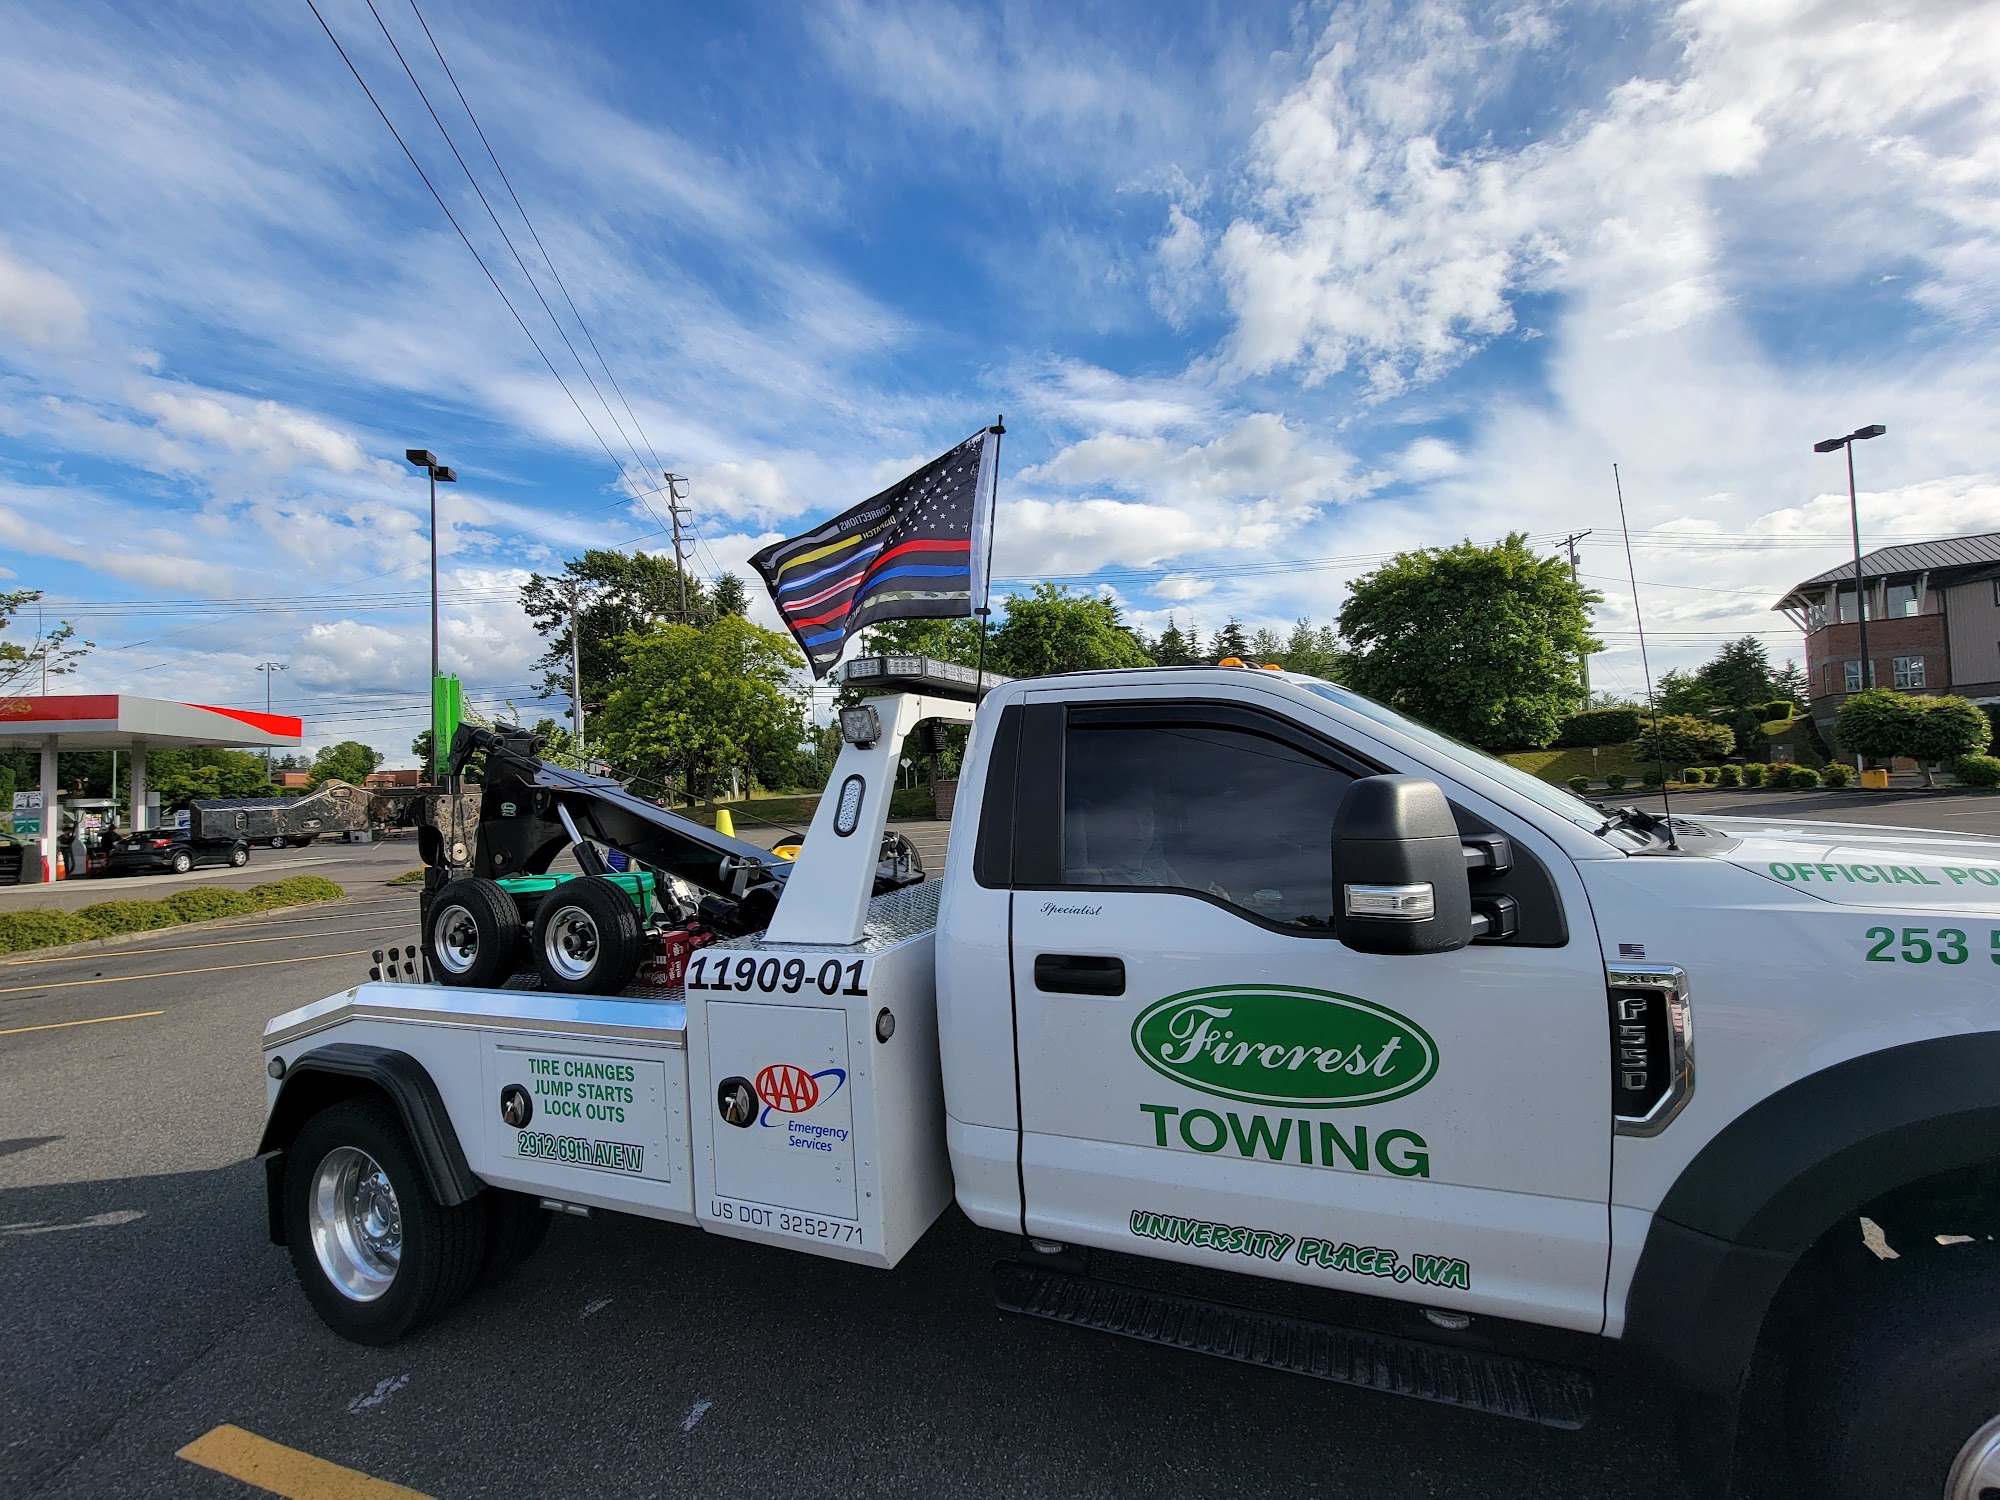 Fircrest Towing